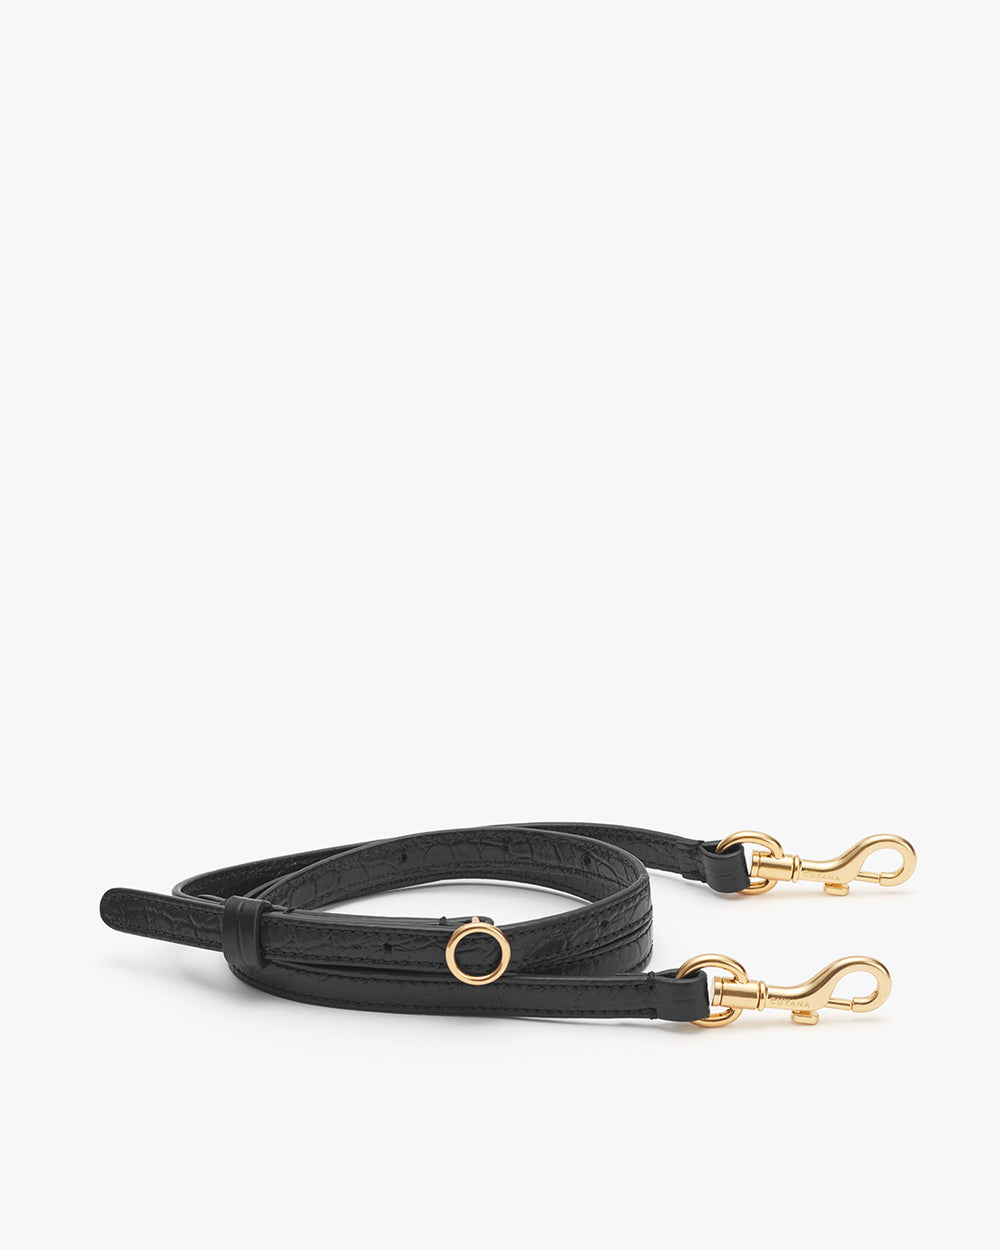 Leather leash with metal clasps and ring.